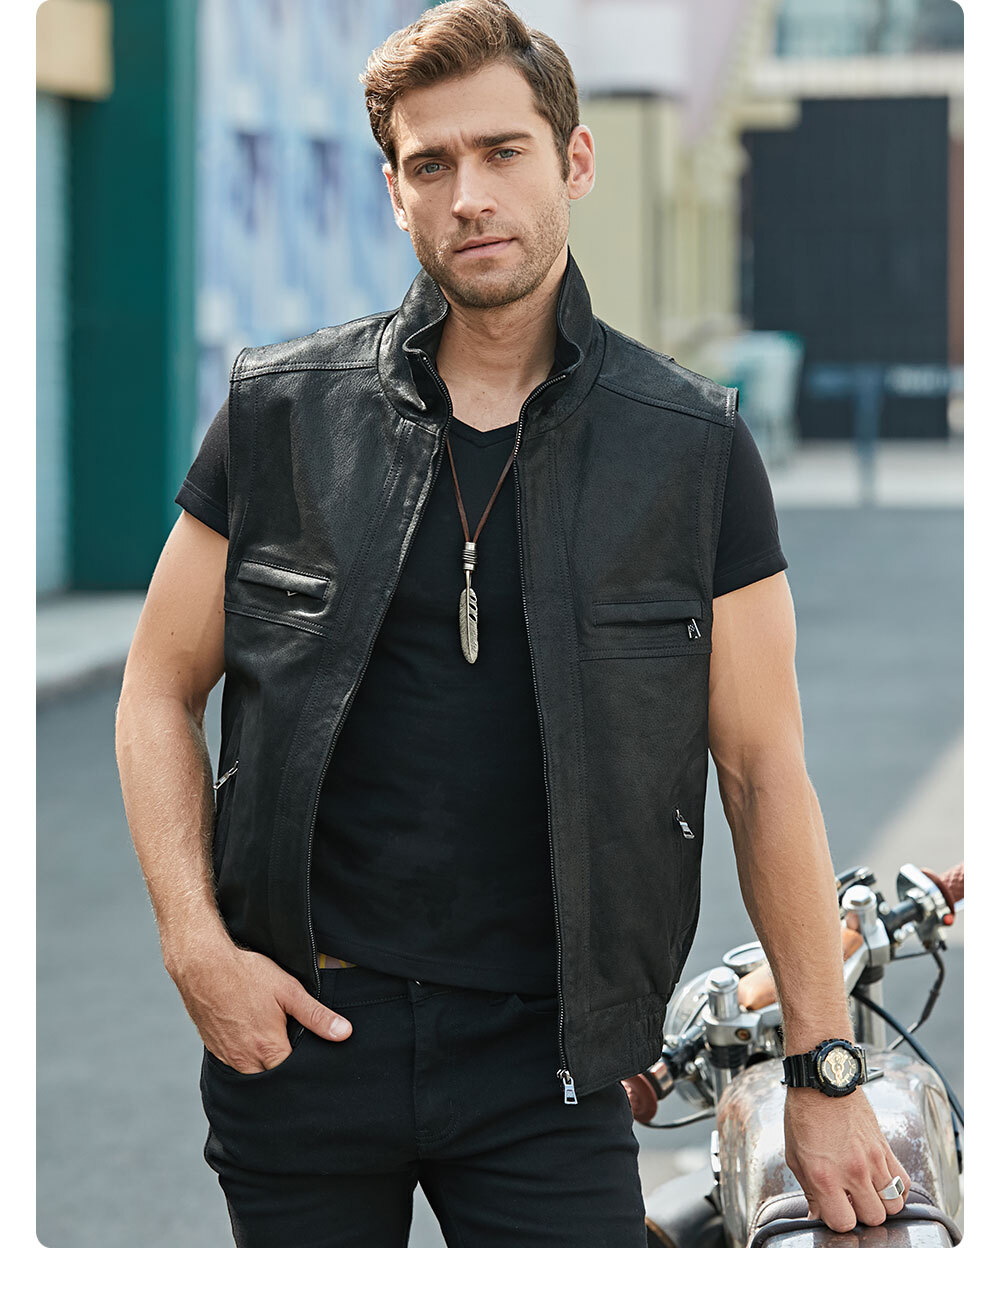 Men's Leather Retro Vest Stand Collar Zippered MXGX278 Stand collar flavor leather motorcycle jacket brands| fashion stand collar flavor leather motorcycle jacket